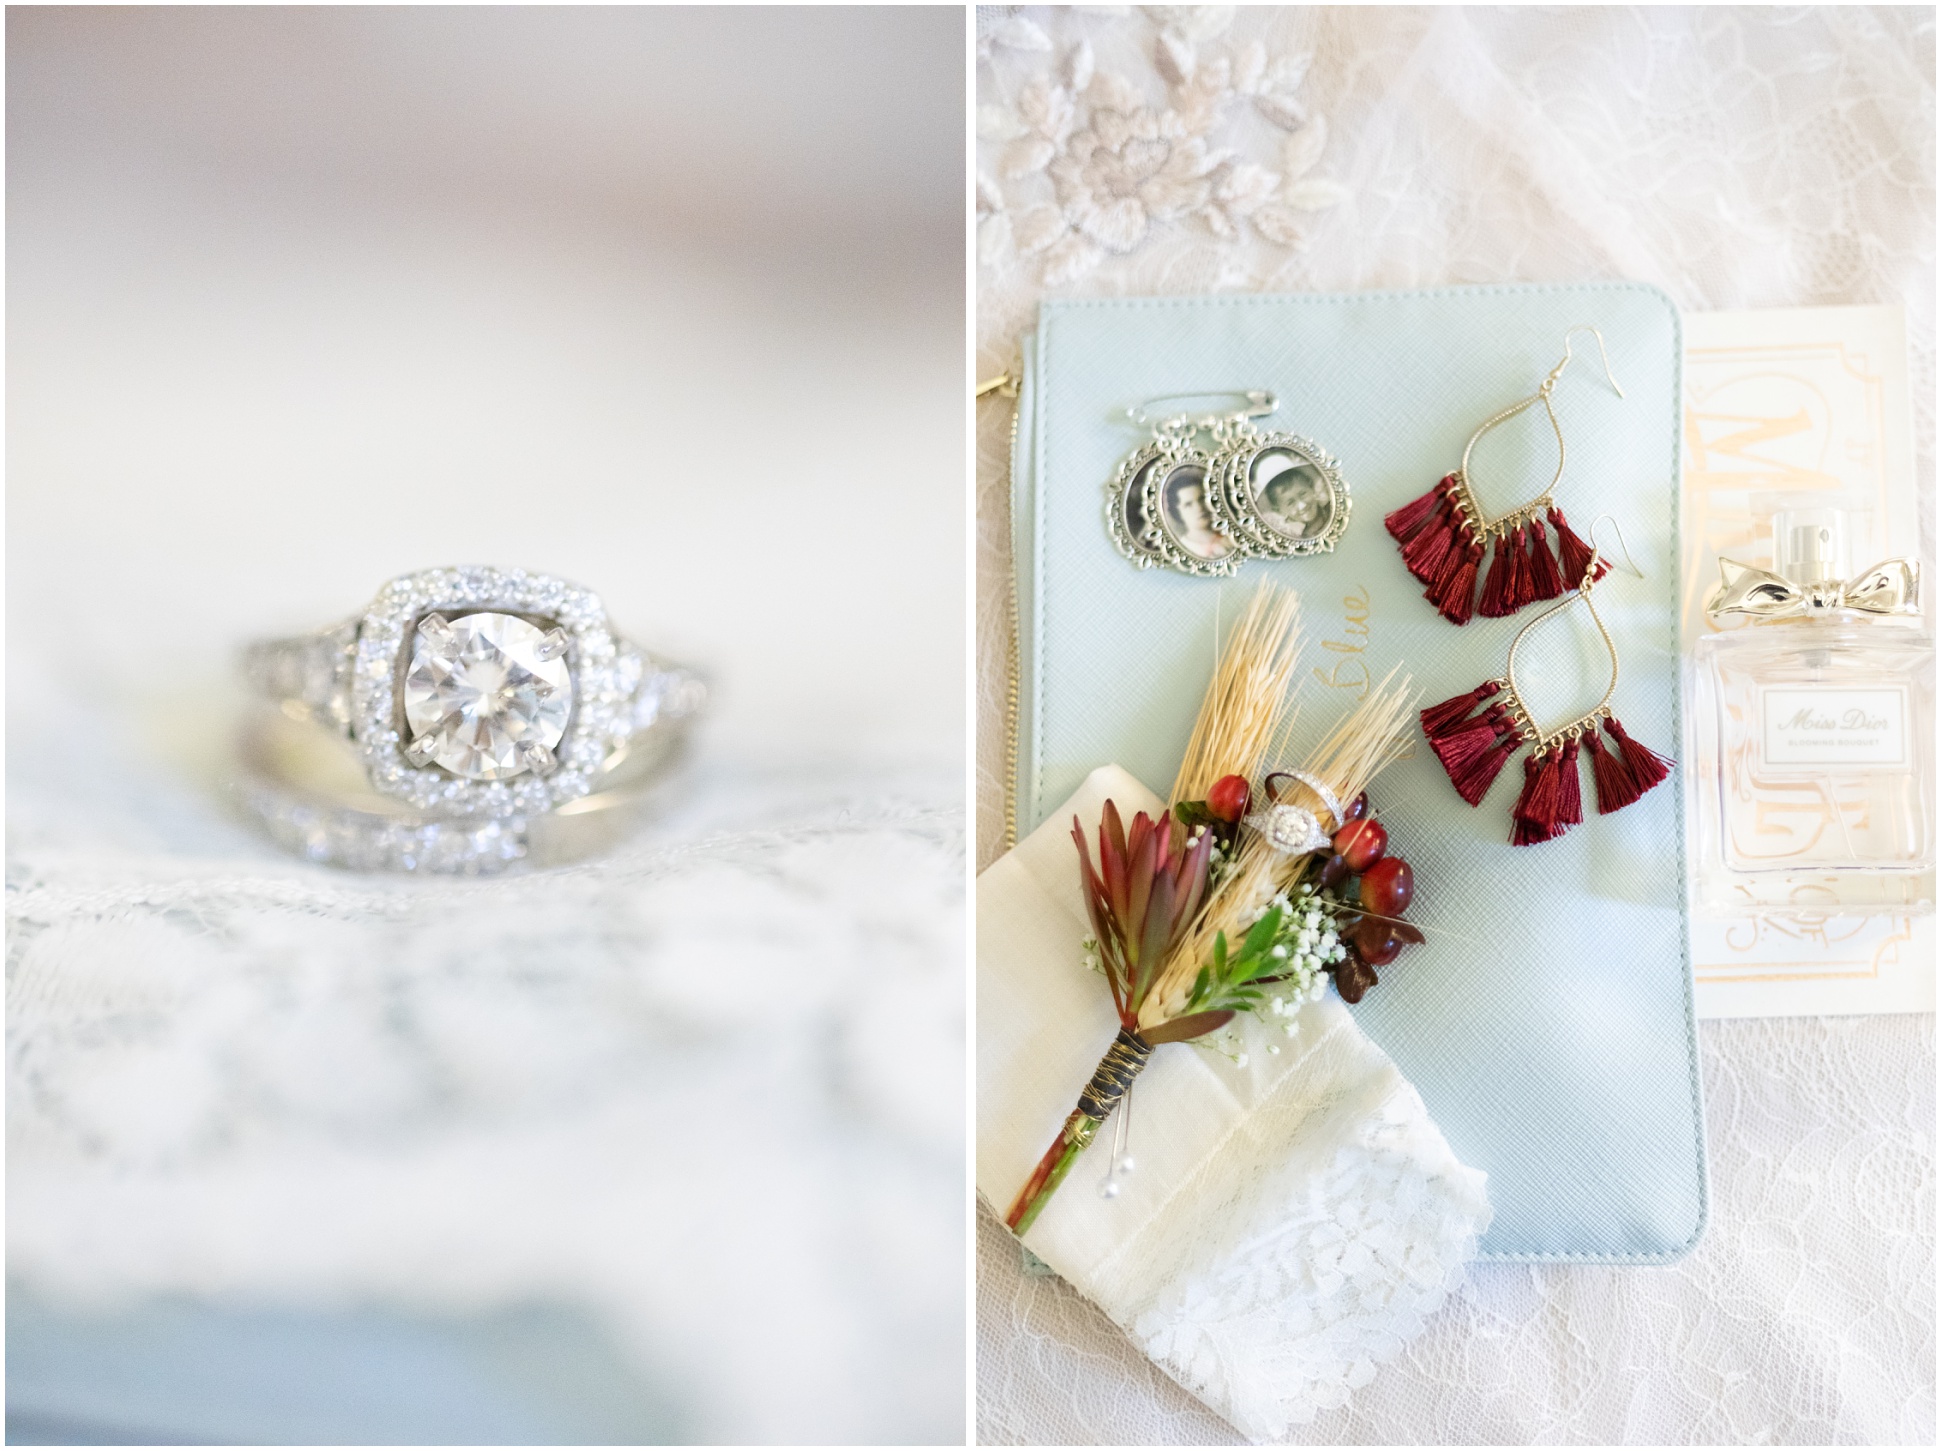 Wedding Ring, Something Blue, Boutonniere with cranberries, wheat grass, and baby's breath 